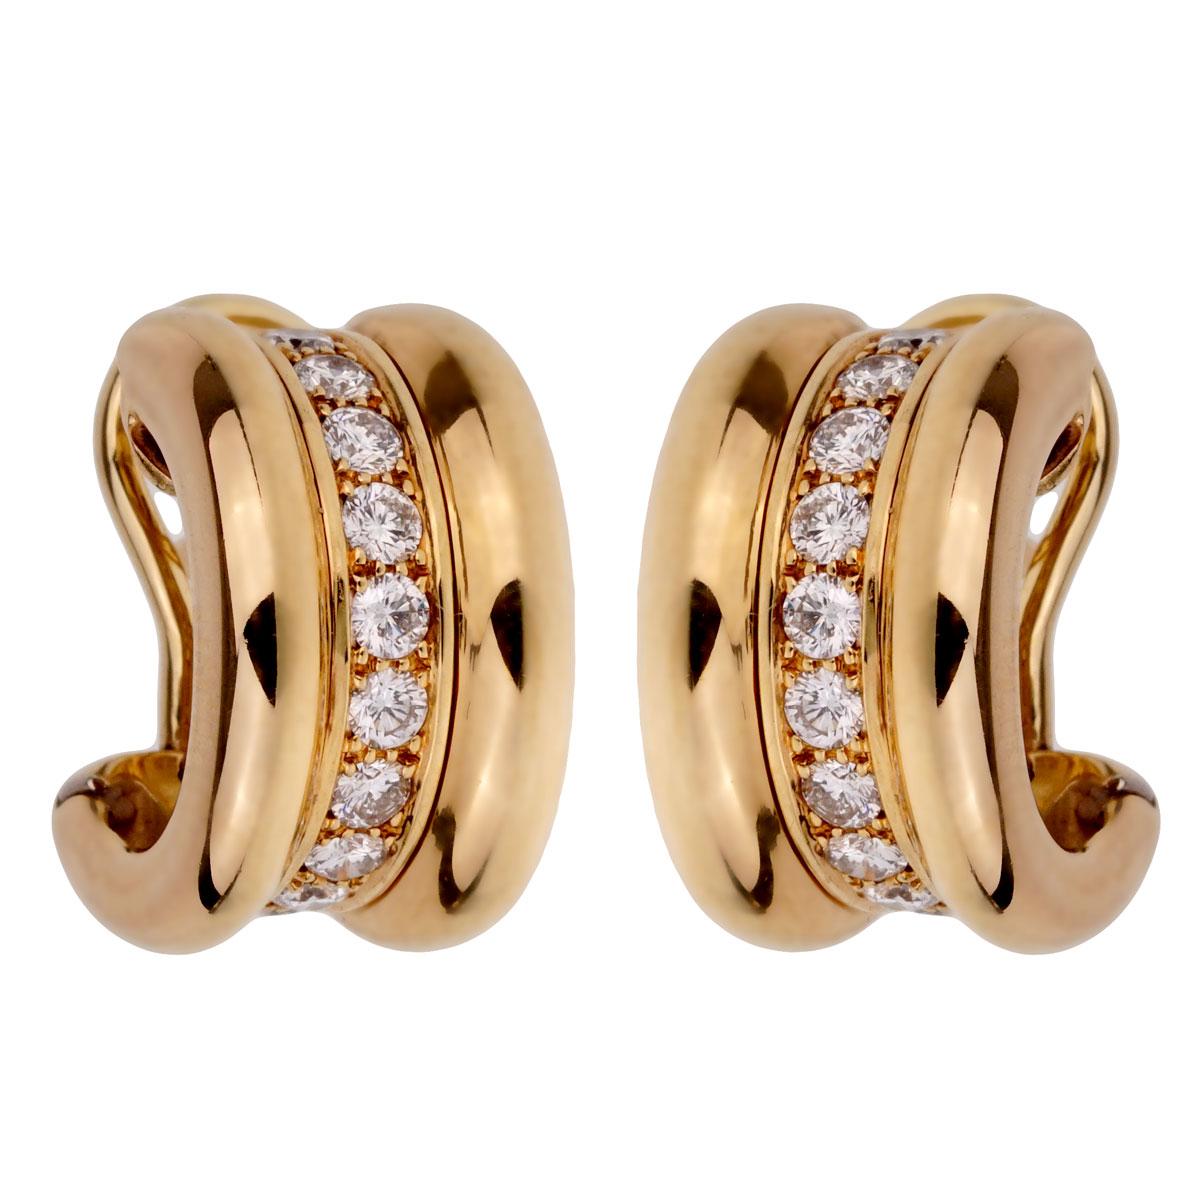 A fabulous classic pair of Chopard diamond earrings, the diamond hoop earrings are adorned with the finest round brilliant cut diamonds in 18k yellow gold.